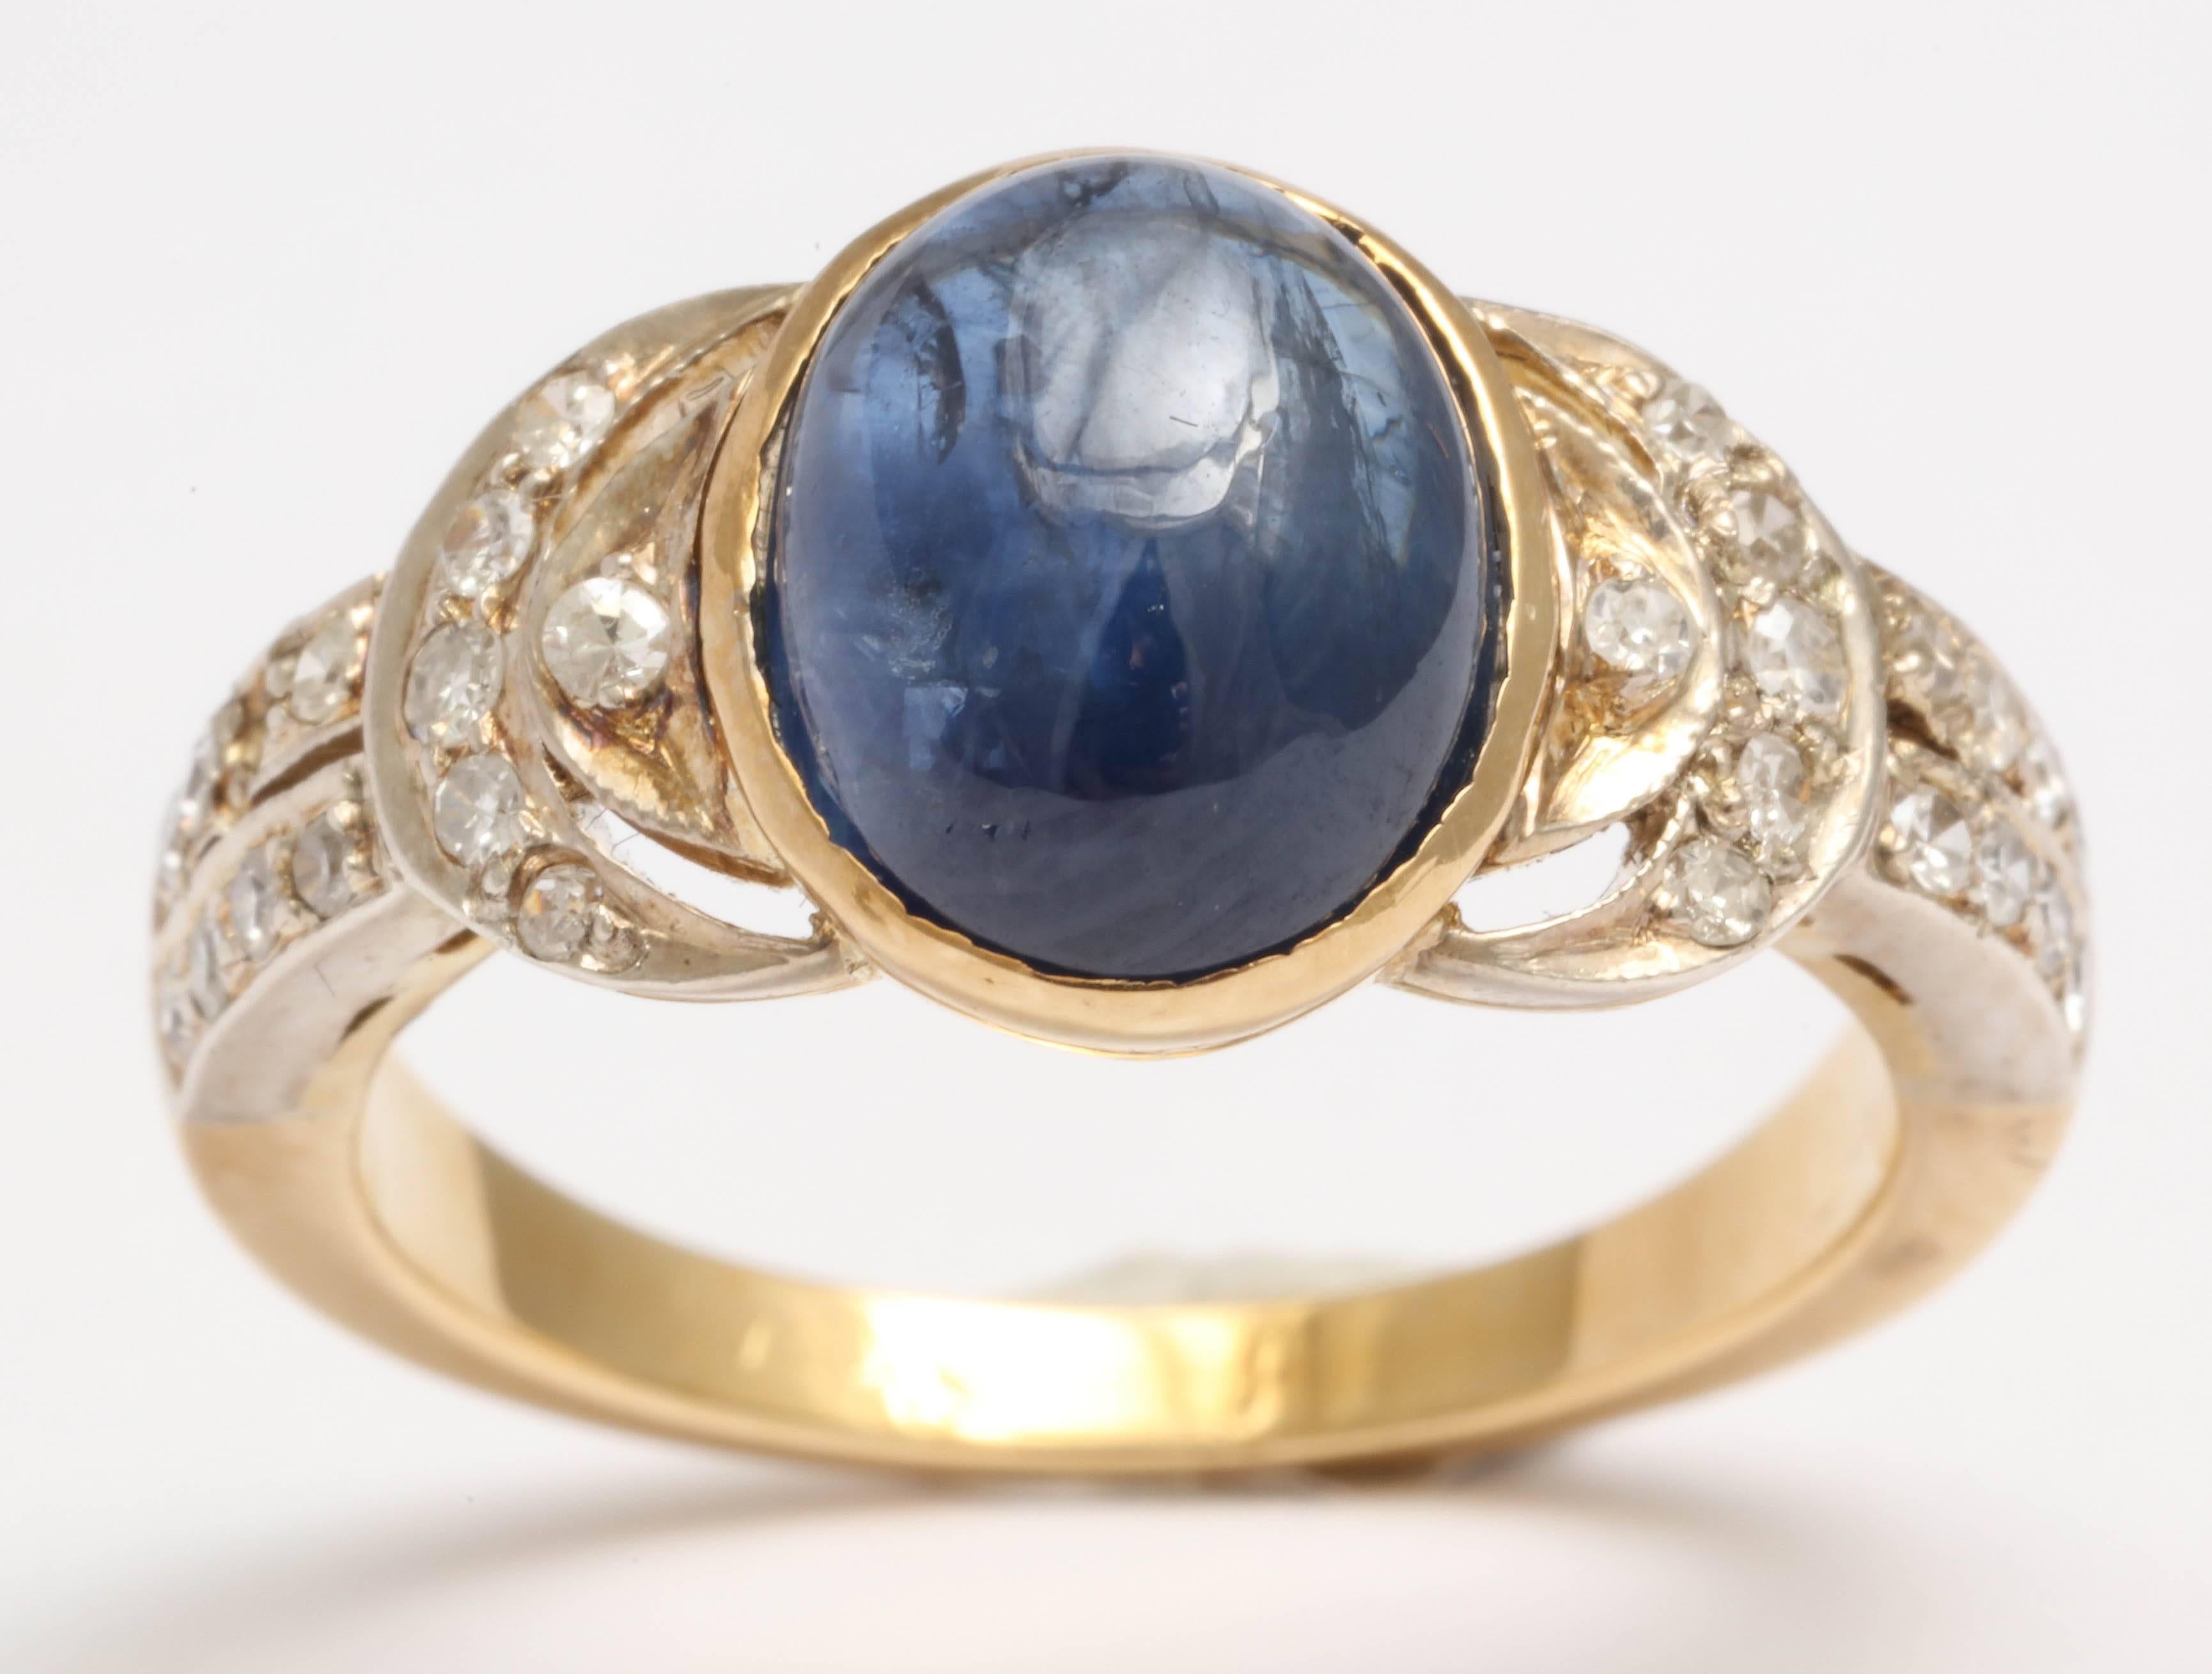 Sweet Oval Cabochon Sapphire, bezel set in 18kt Yellow Gold flanked on either side by single cut Diamonds set in Platinum.  28 Diamonds Total.   Size 5 - but can be altered.
Very sweet and delicate.

